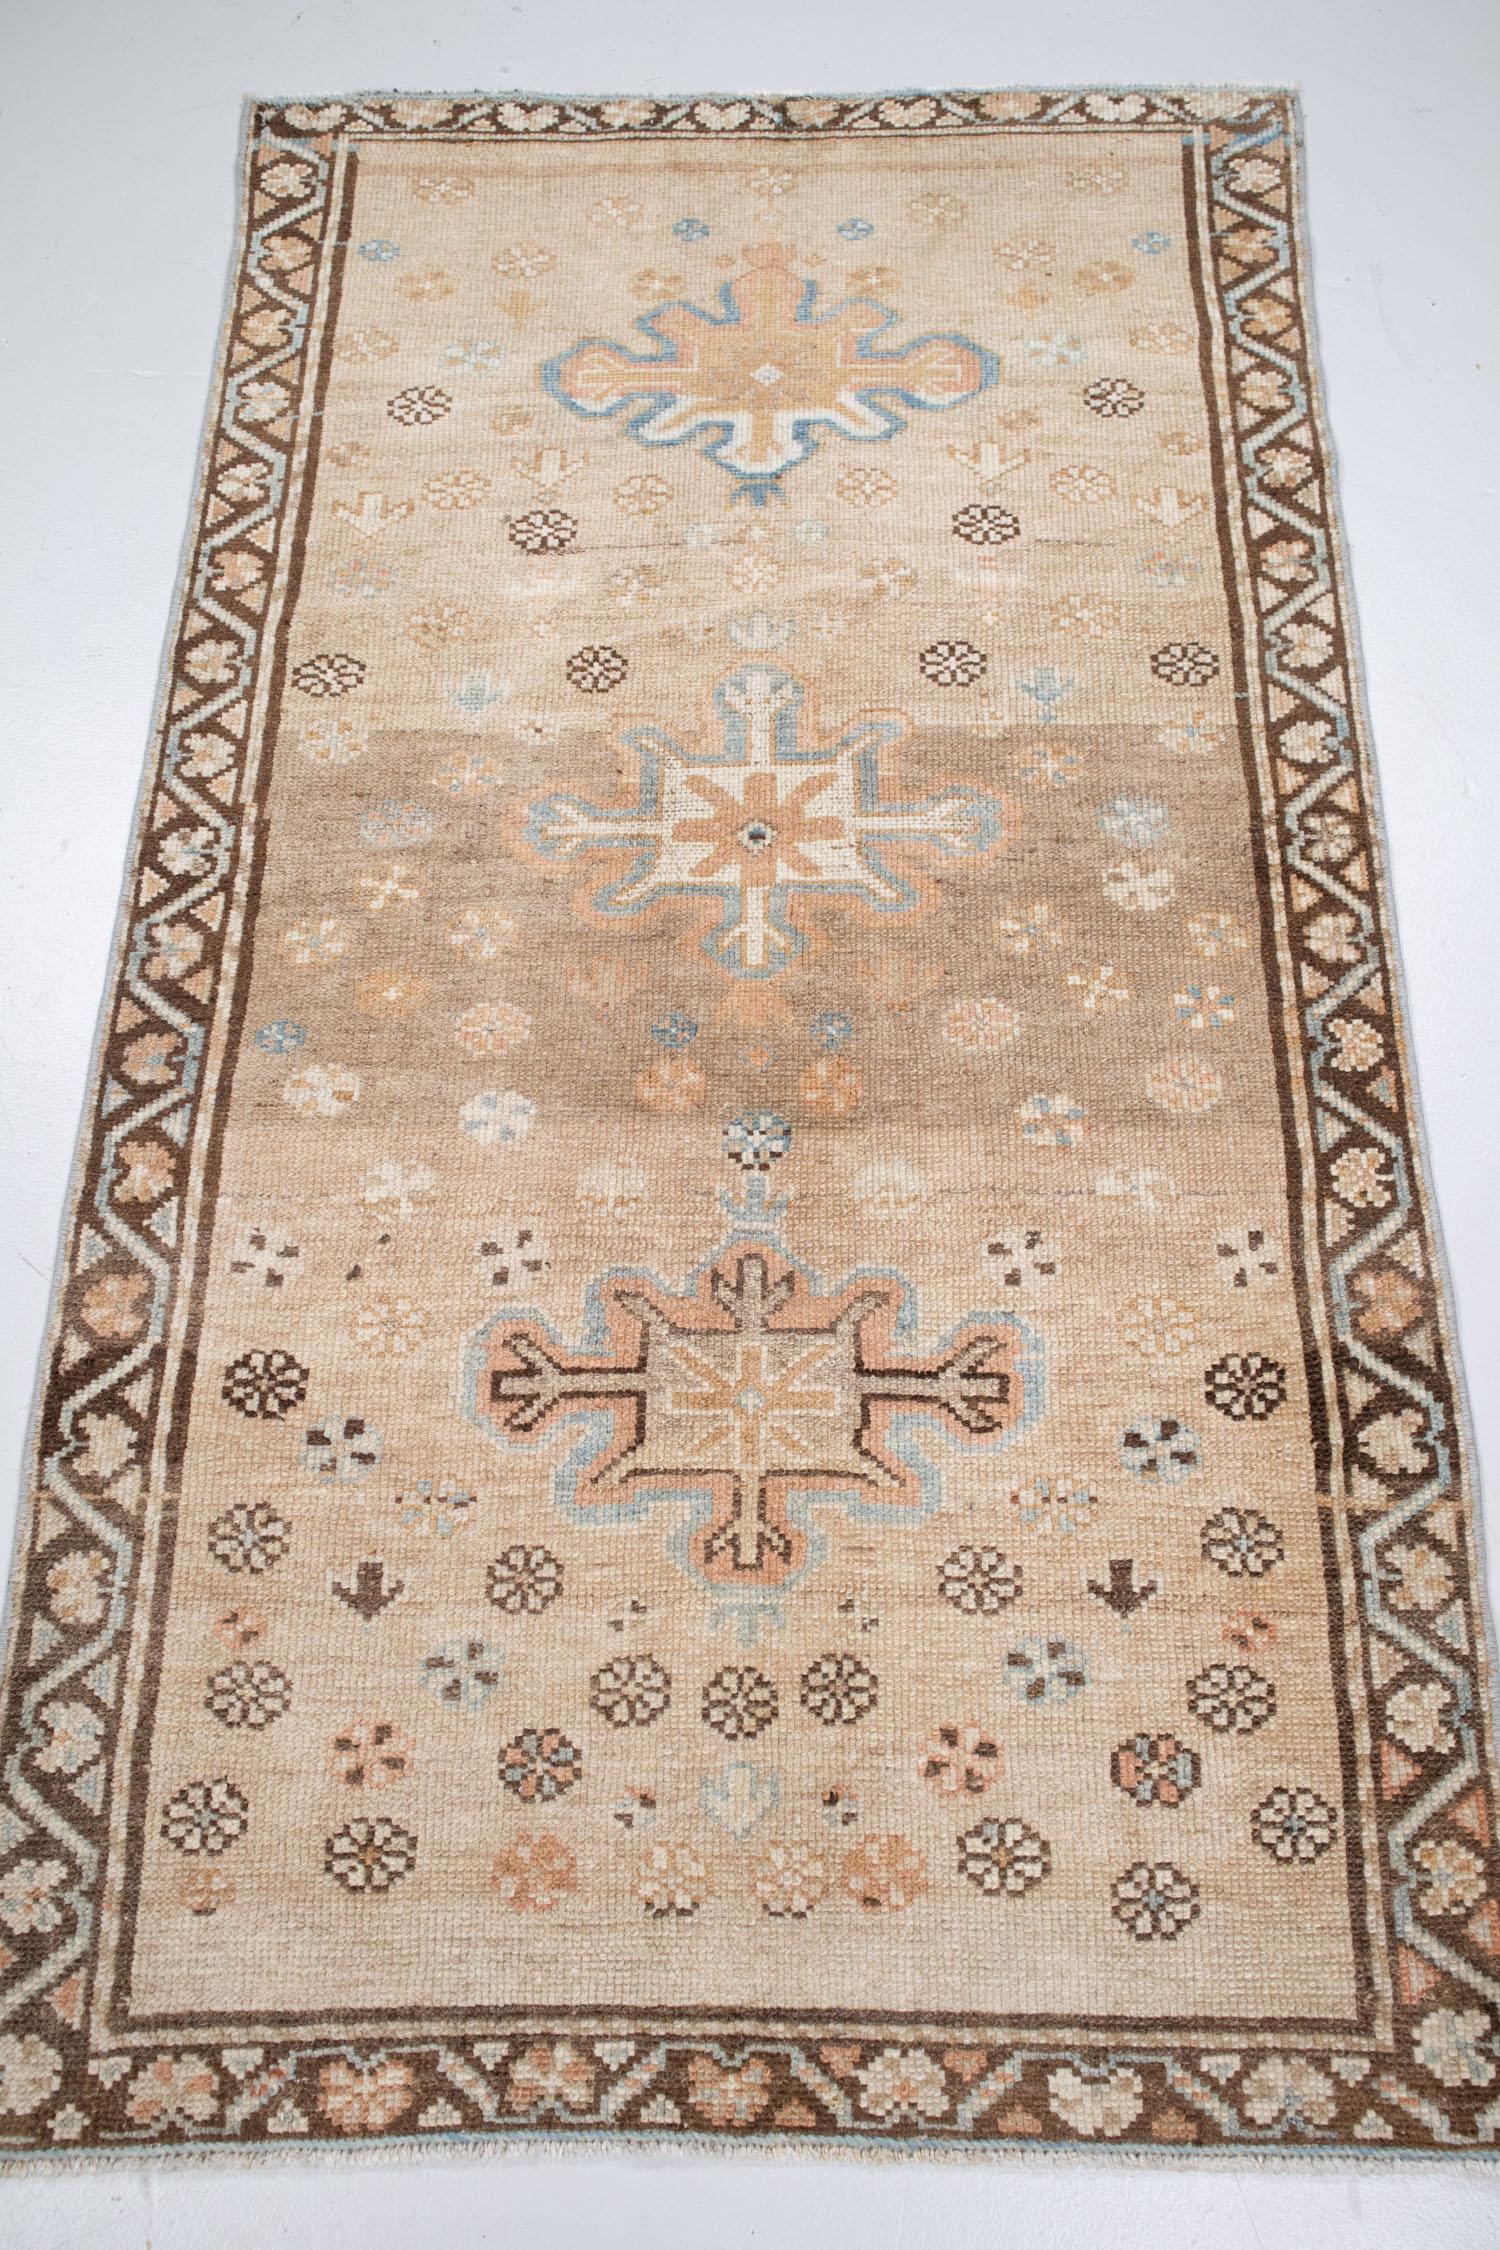 Antique Camel Hair Sarab Rug S-R5541 In Good Condition For Sale In West Palm Beach, FL